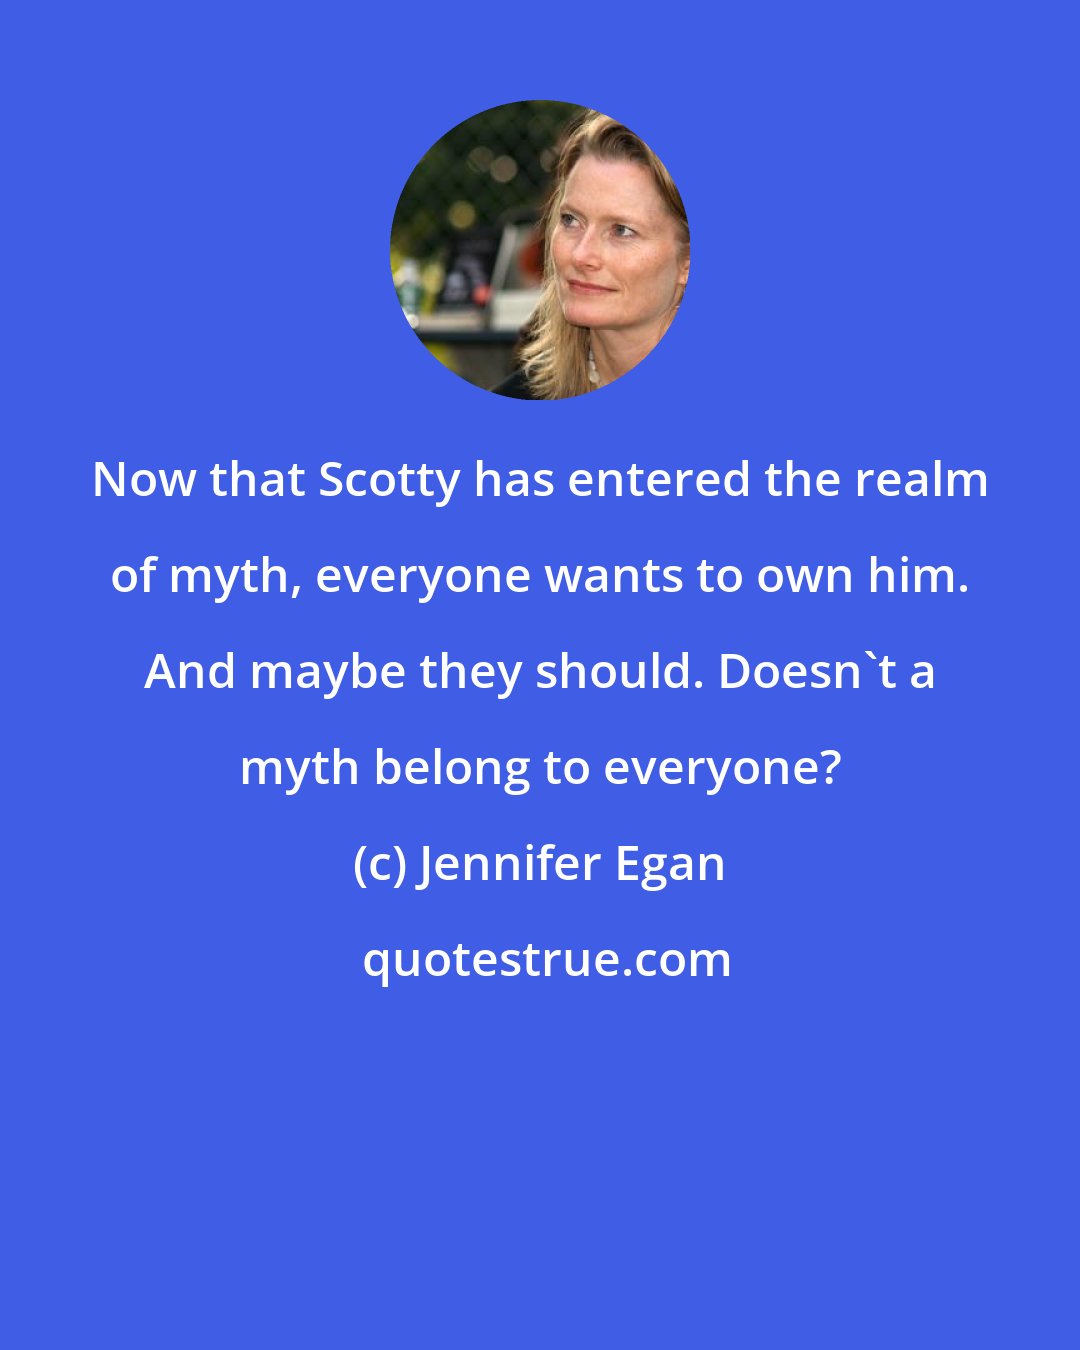 Jennifer Egan: Now that Scotty has entered the realm of myth, everyone wants to own him. And maybe they should. Doesn't a myth belong to everyone?